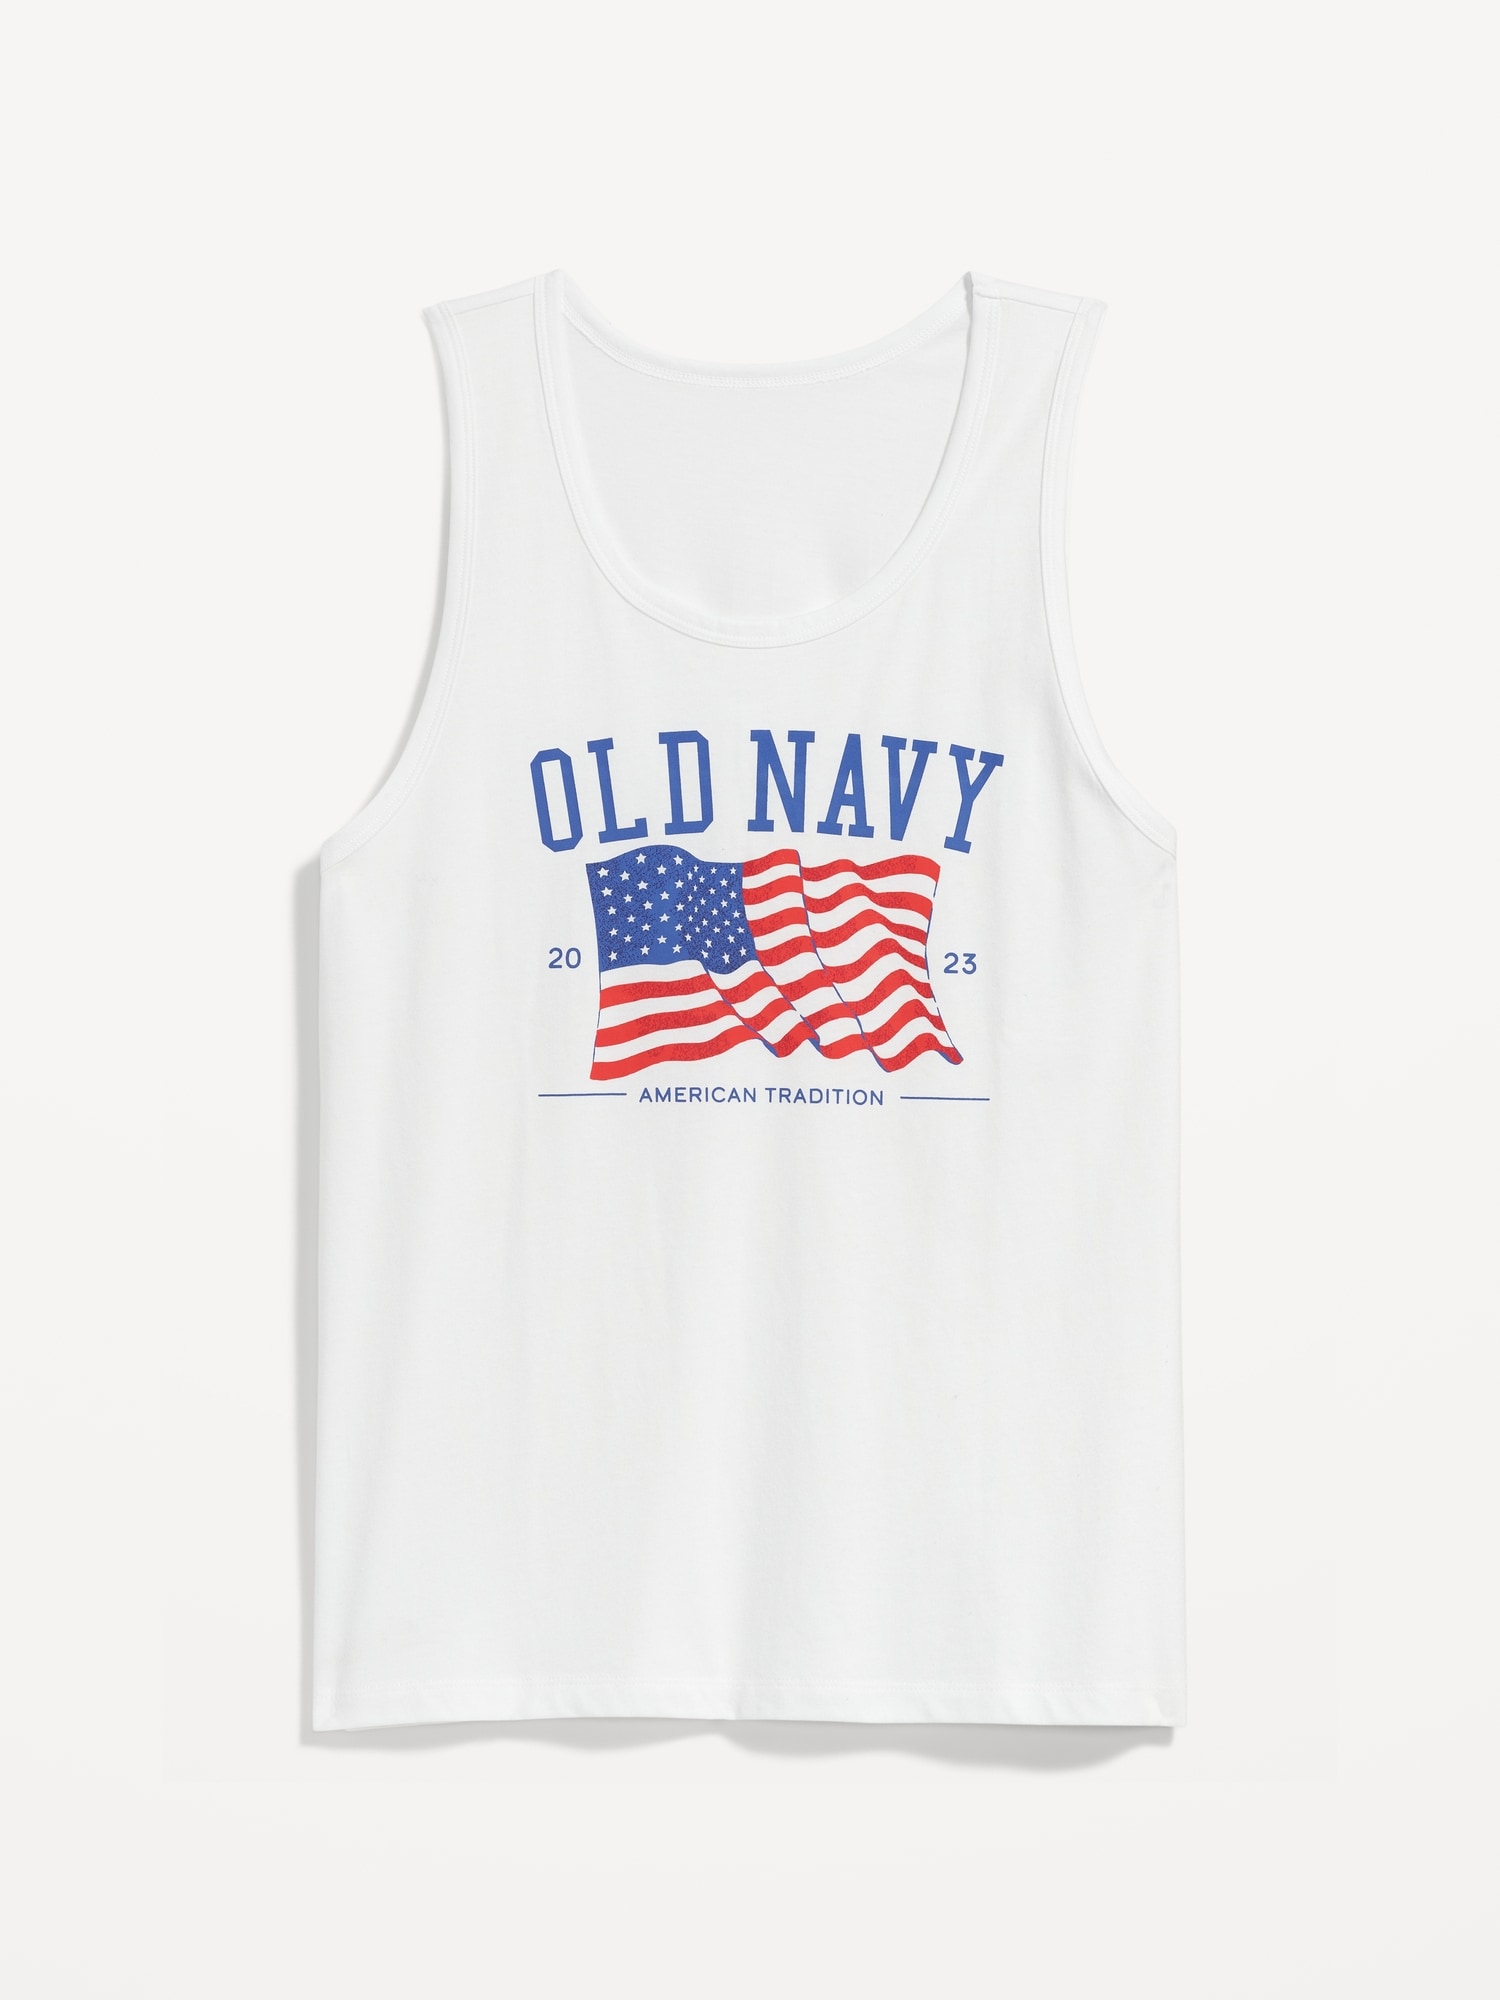 Matching "Old Navy" Flag Graphic Tank Top Old Navy